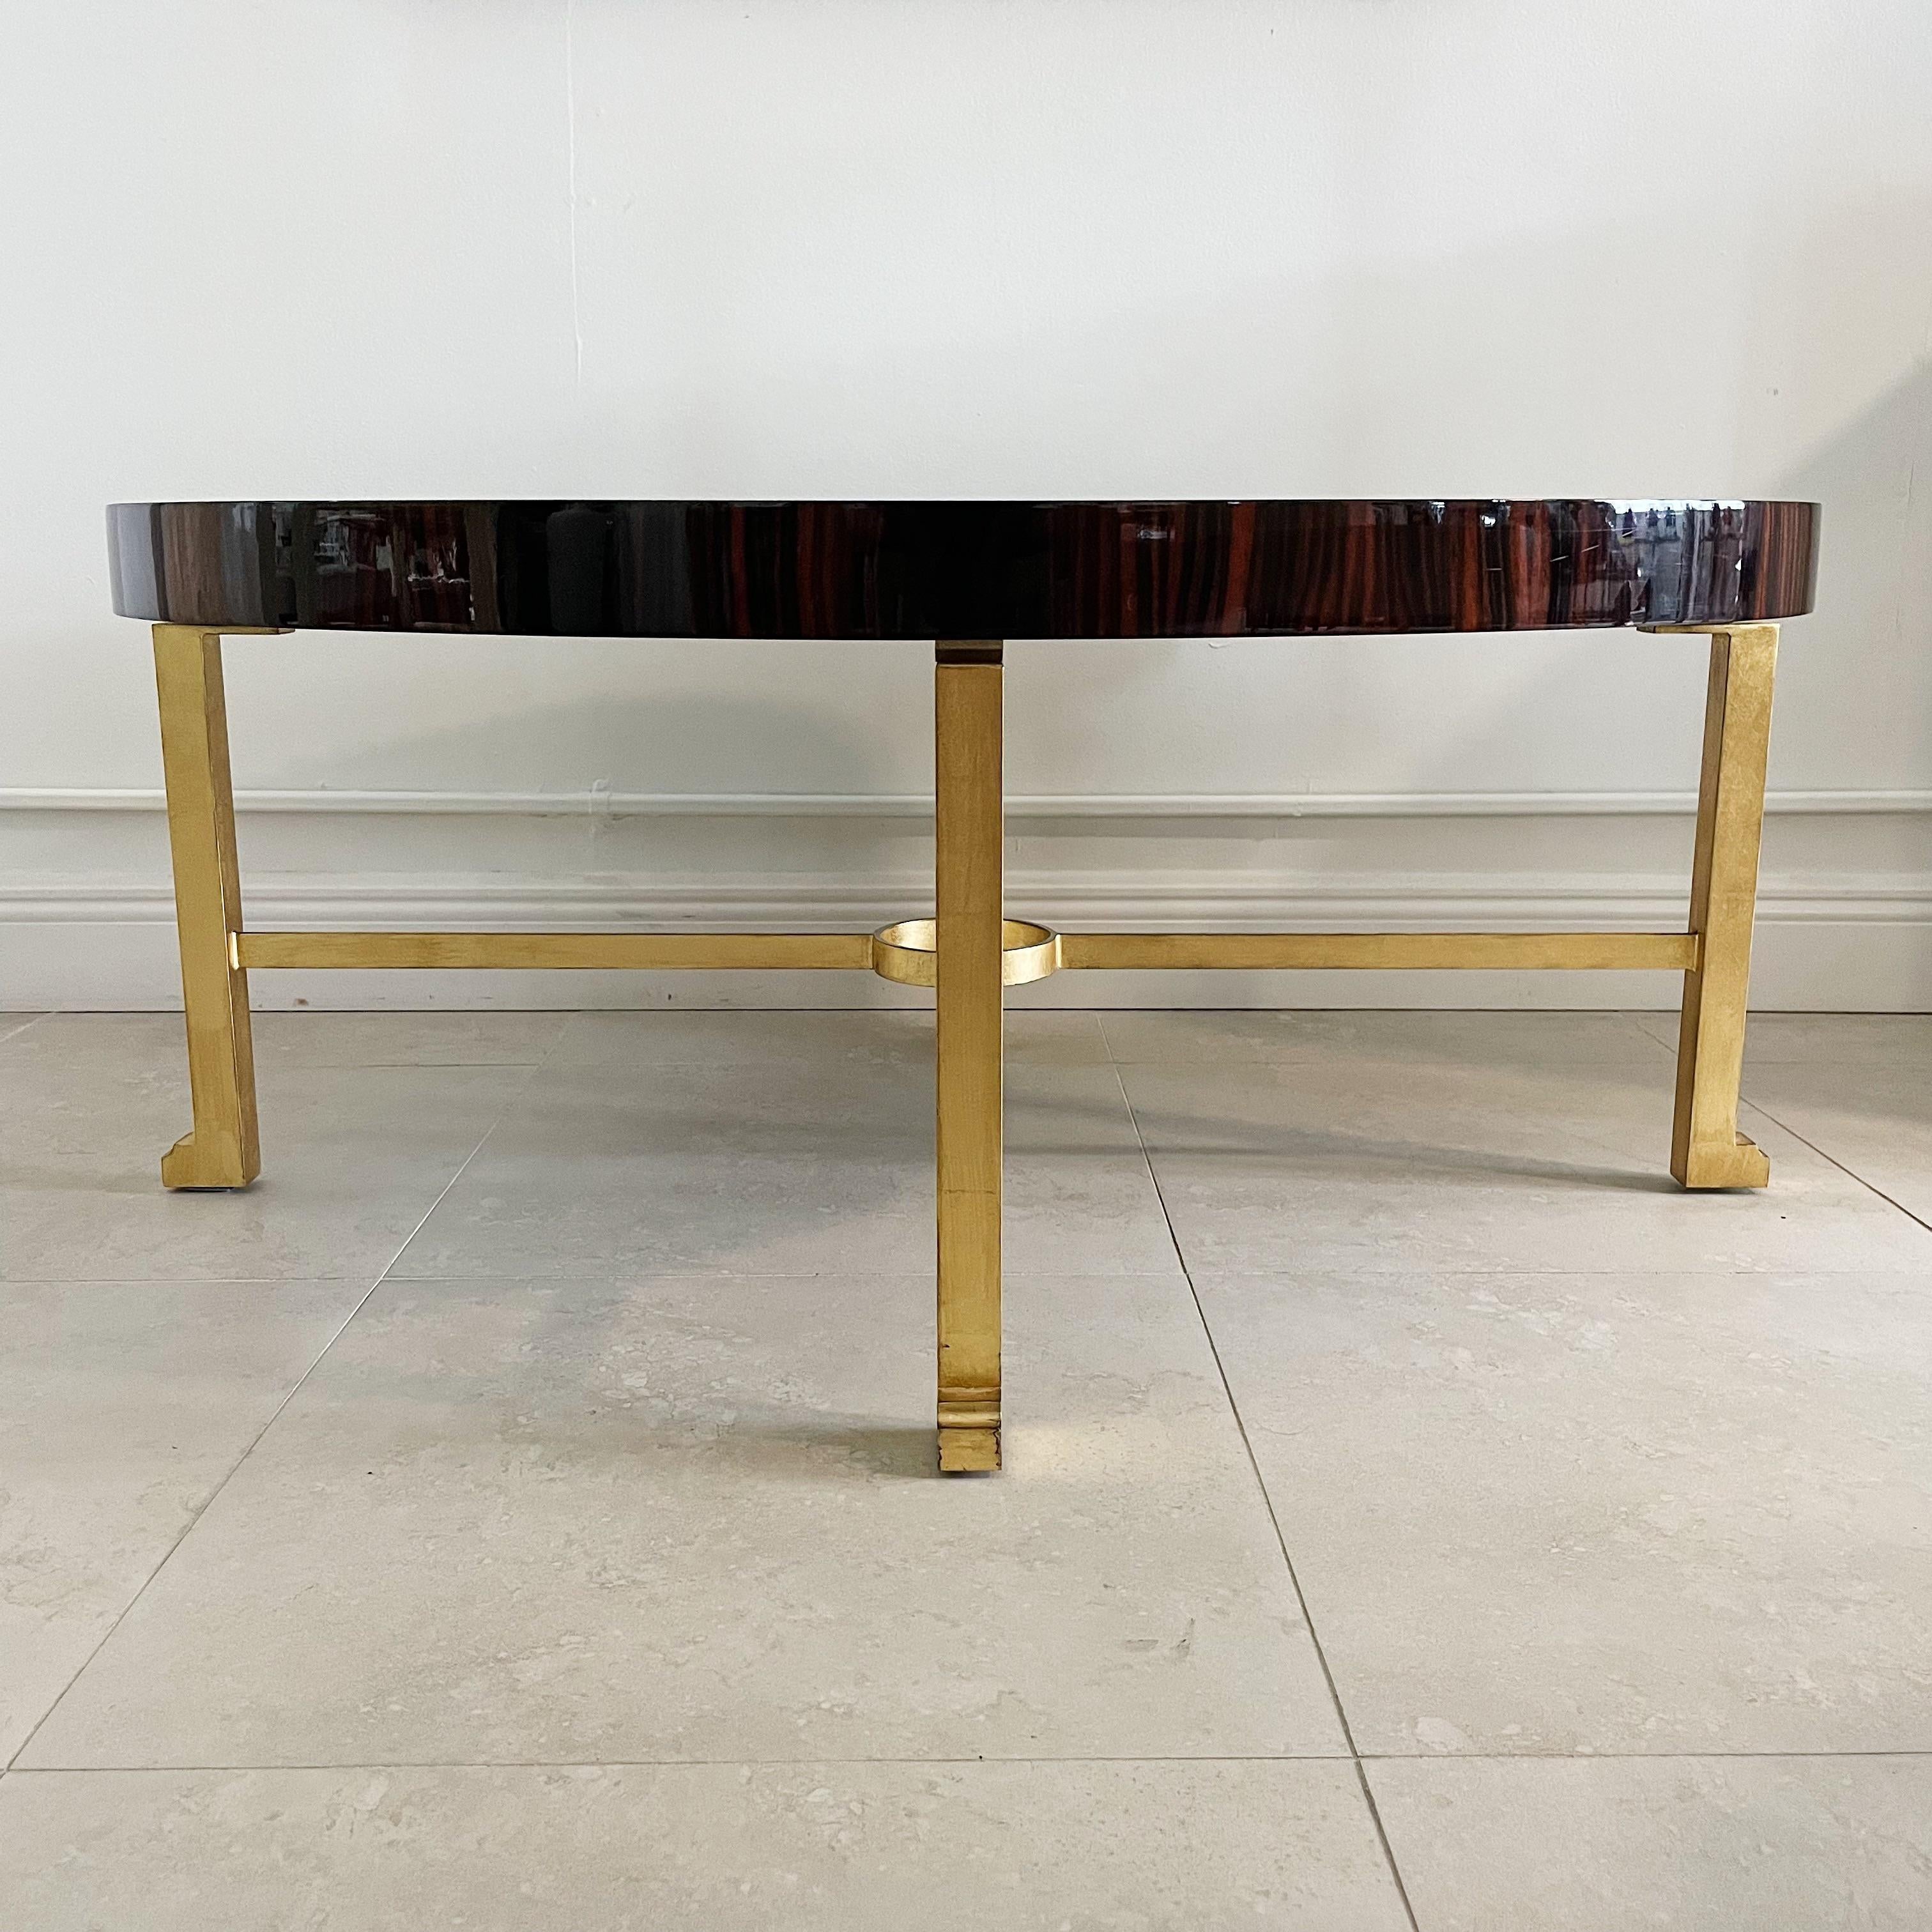 Macassar ebony veneer, gilt iron and parchment coffee table by Karl Springer circa 1995. Signed on underside.